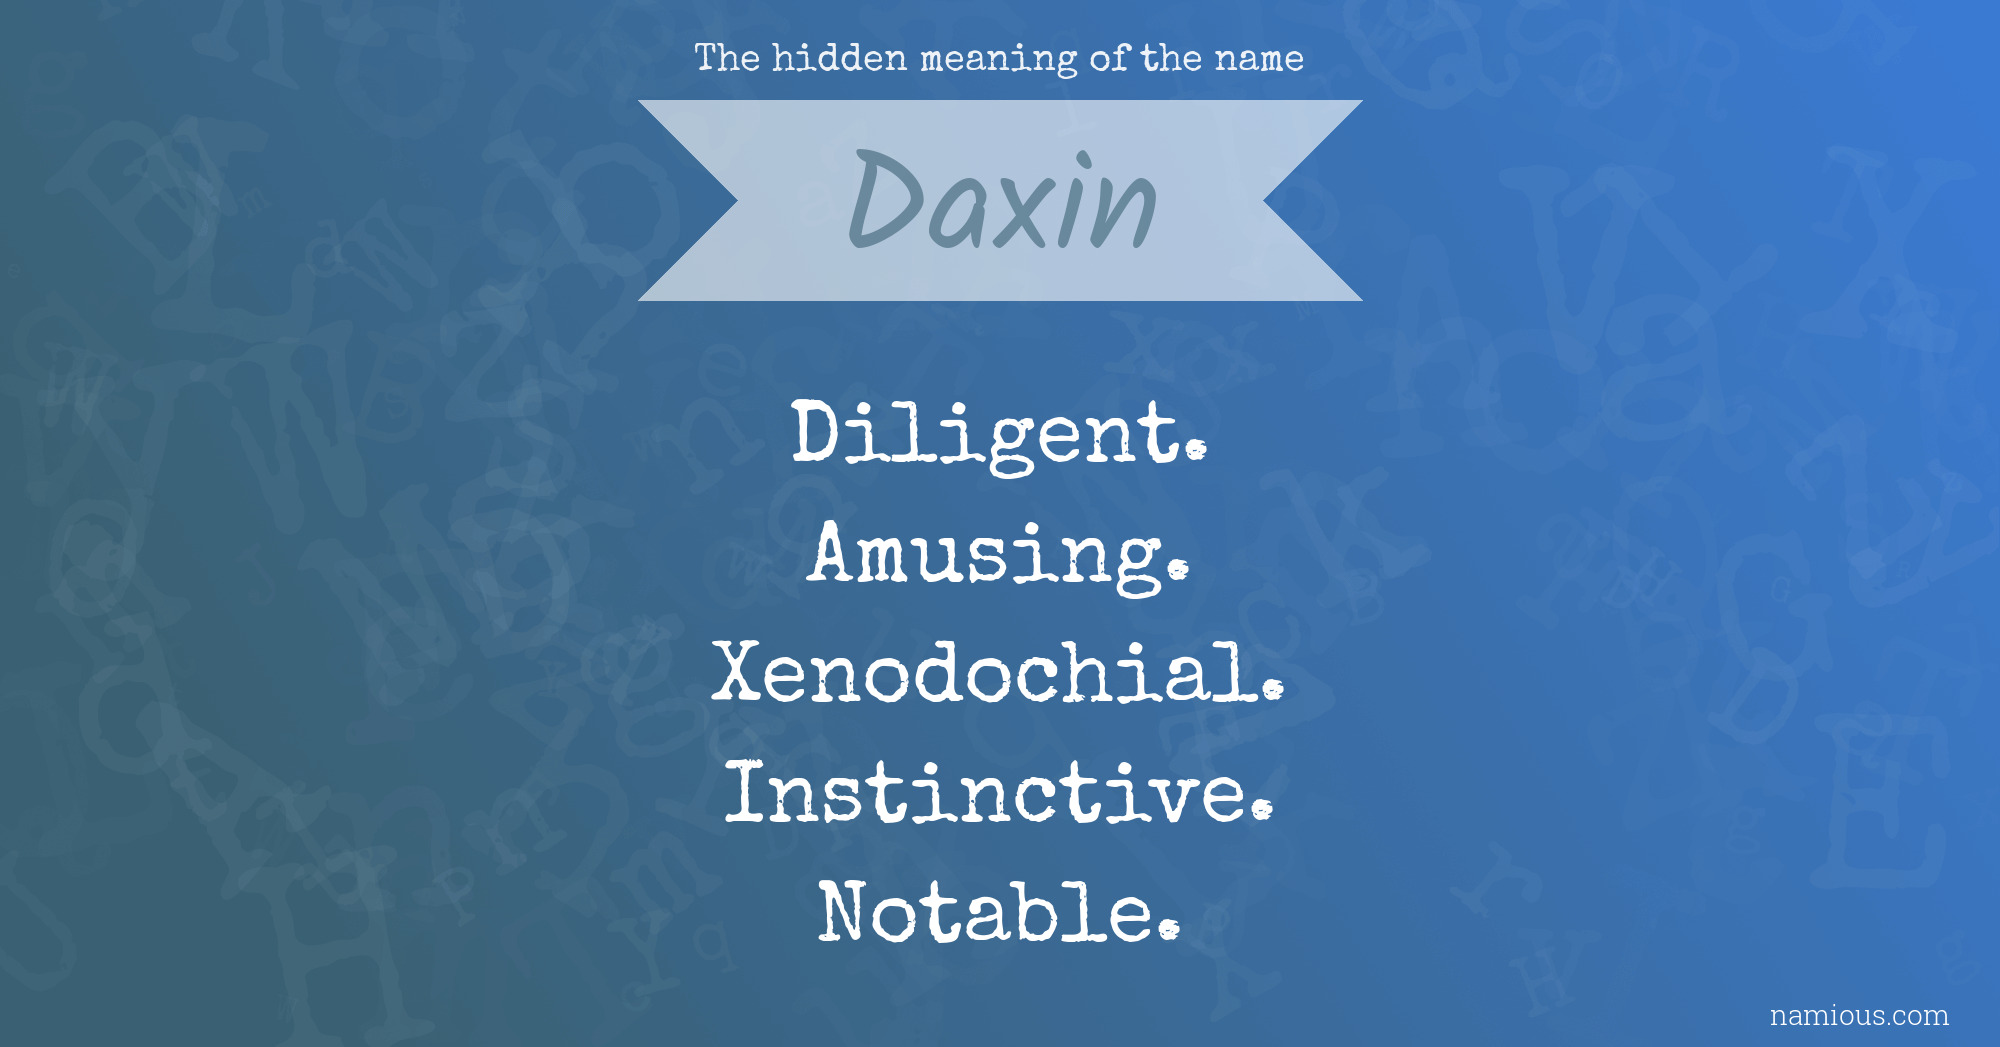 The hidden meaning of the name Daxin